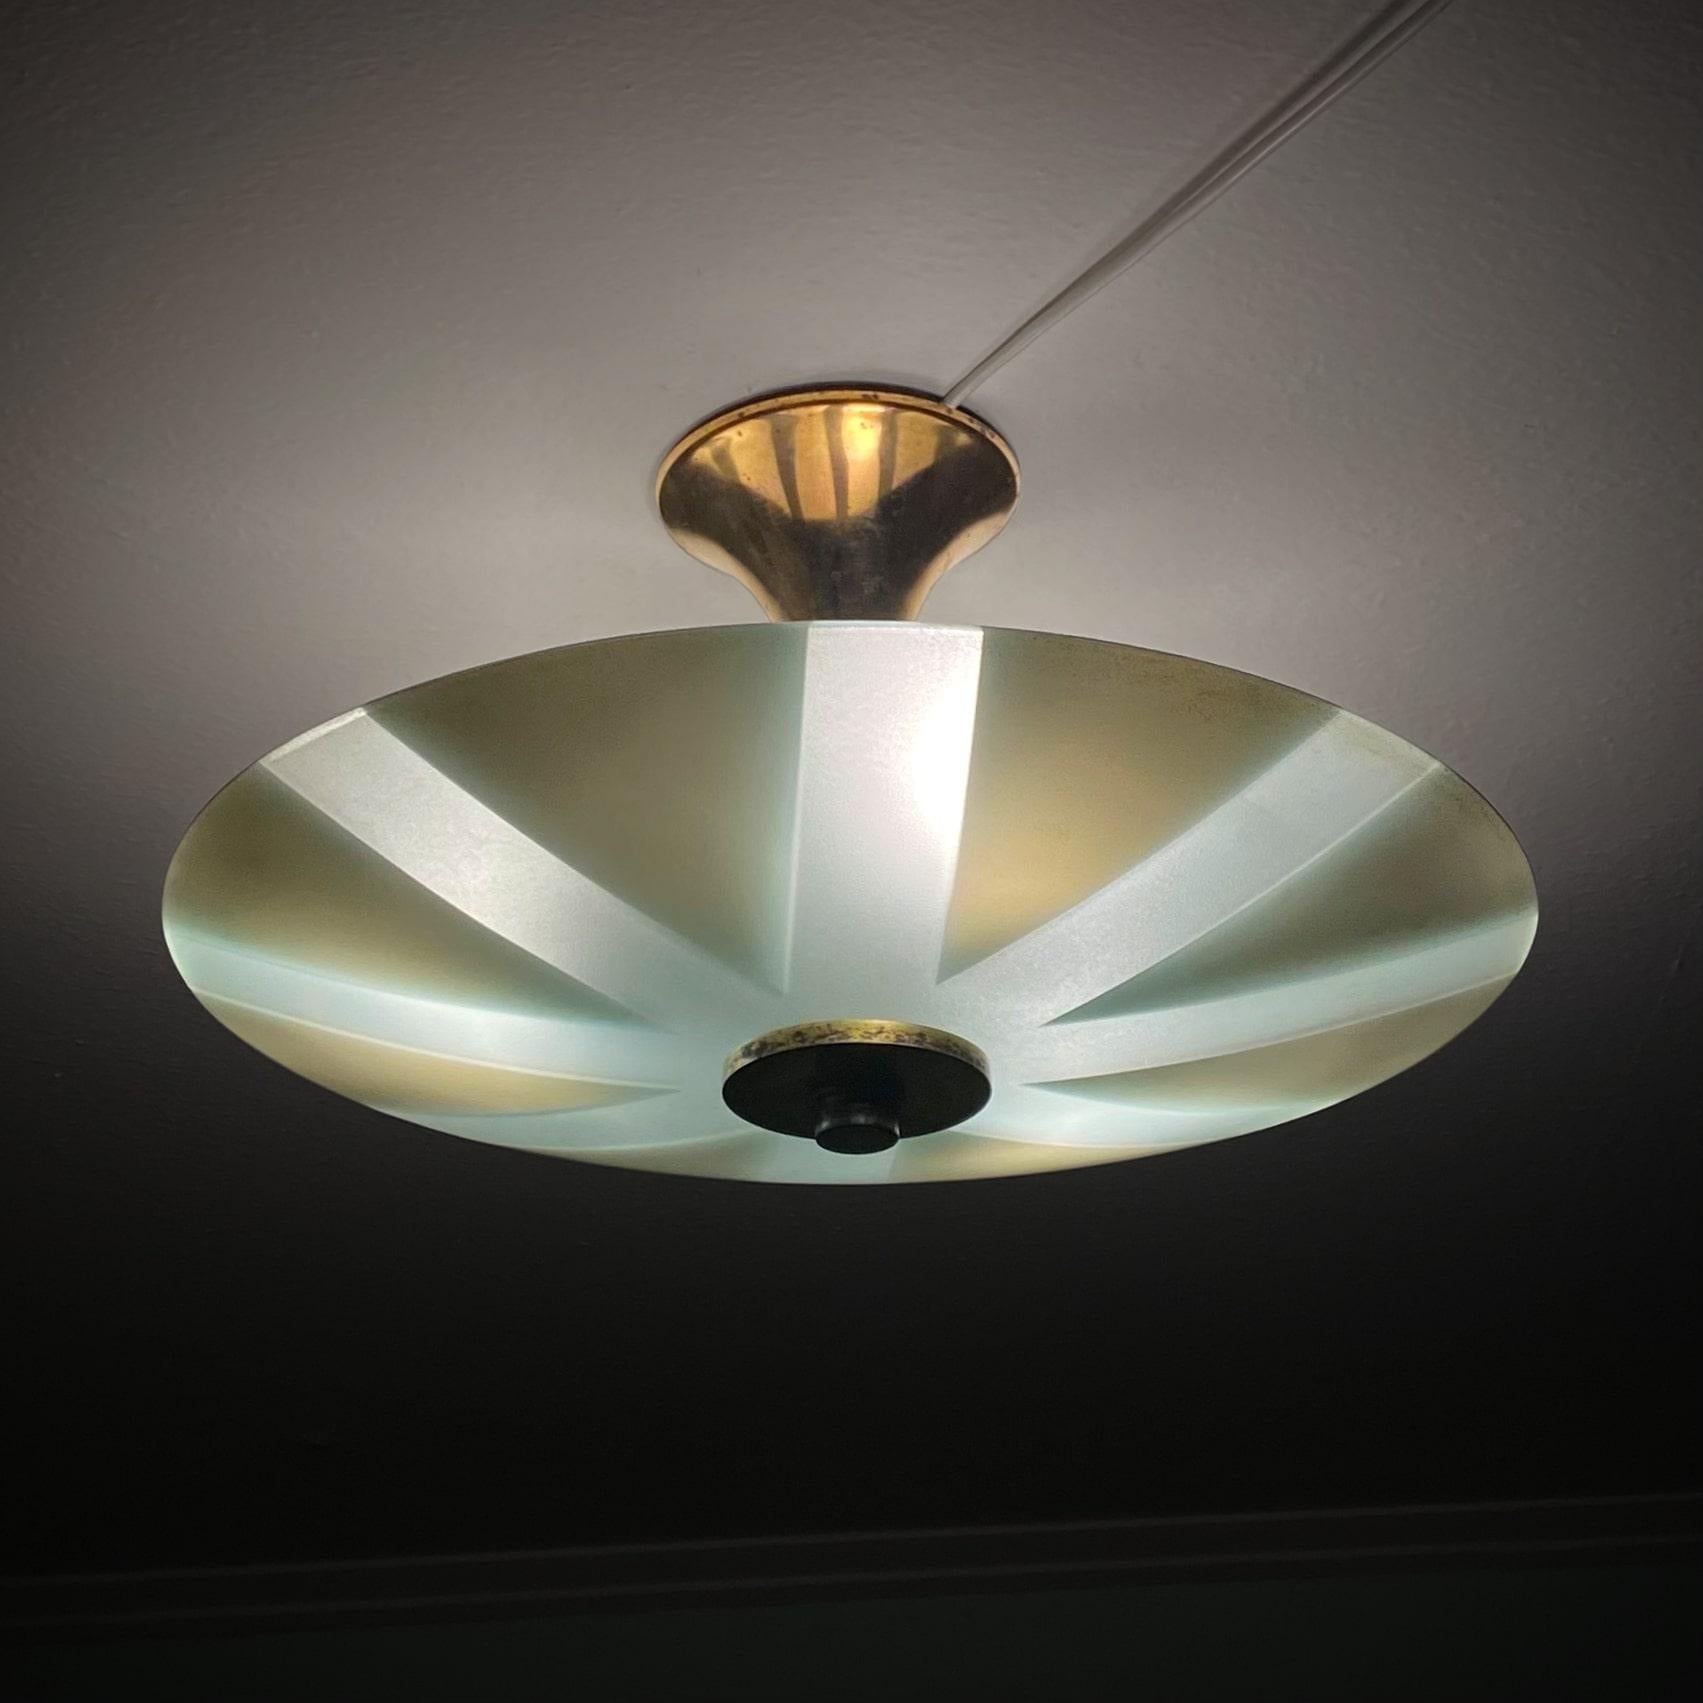 Swedish 1930s ceiling fixture made from glass and brass. Large circular glass bowl with white triangles mounted on a brass frame with a large bell-shaped canopy. Three E27 lamp sockets are mounted just above the glass shade.